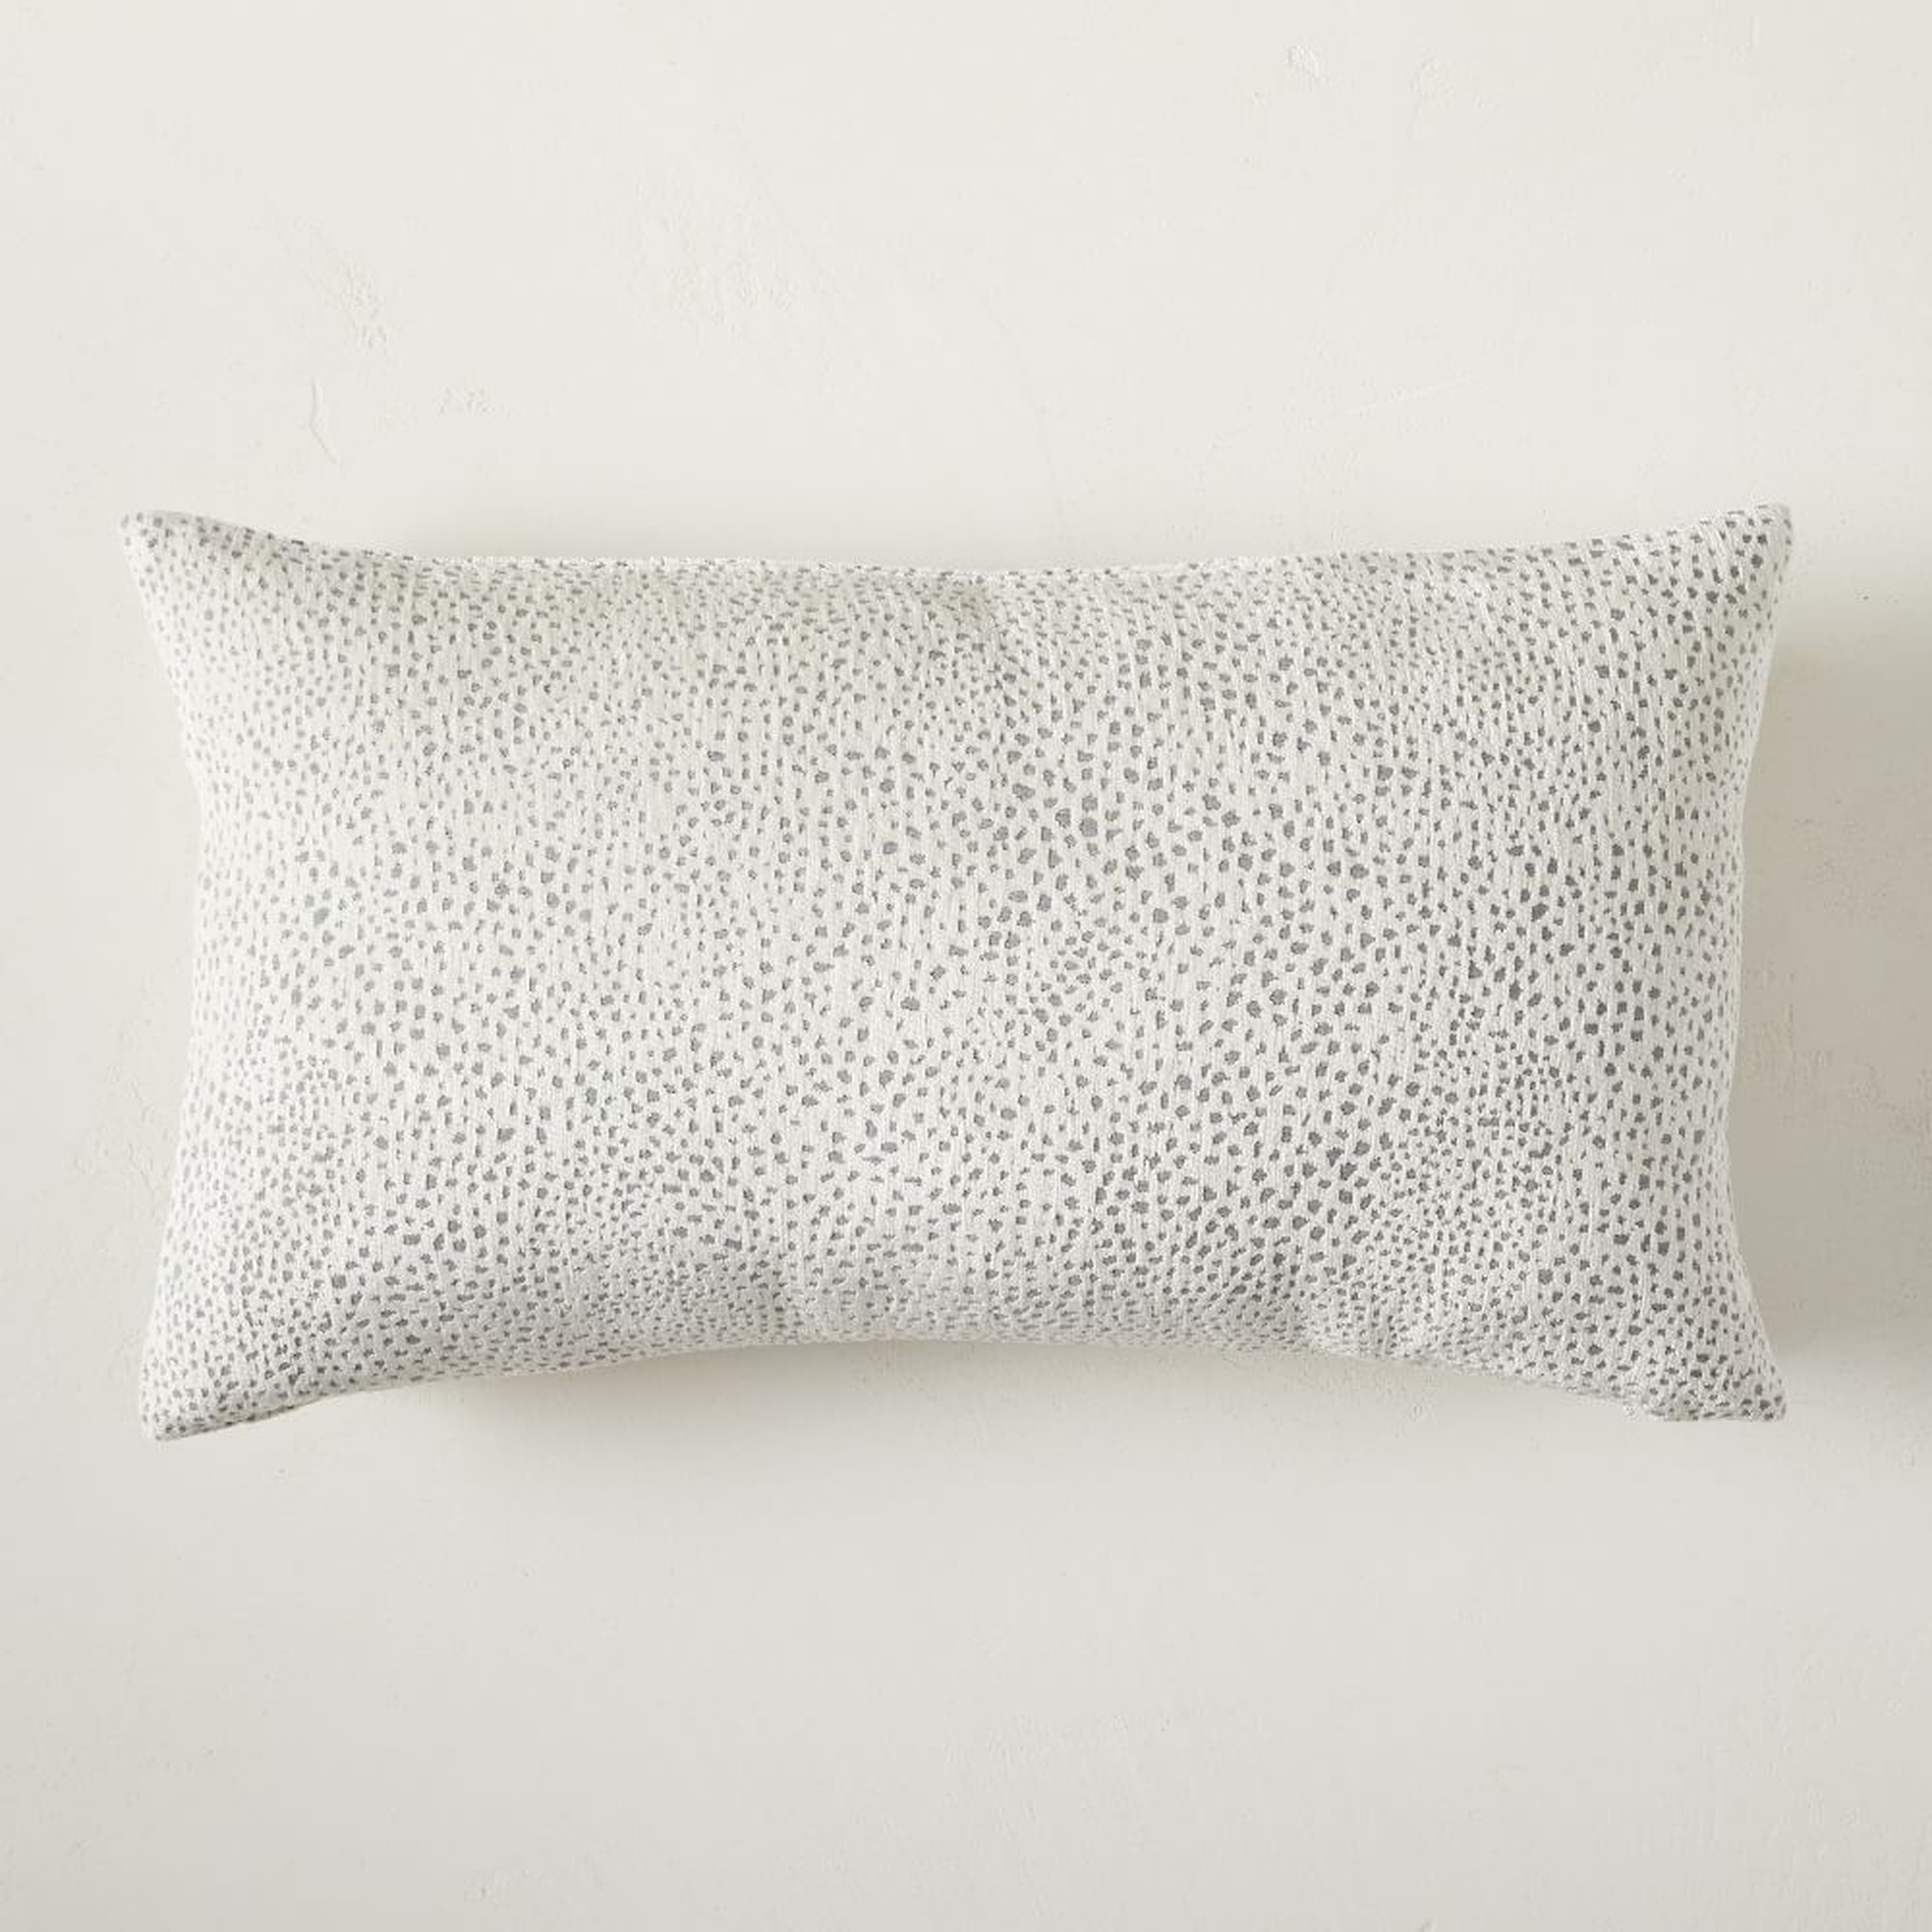 Dotted Chenille Jacquard Pillow Cover, 12"x21", White - West Elm